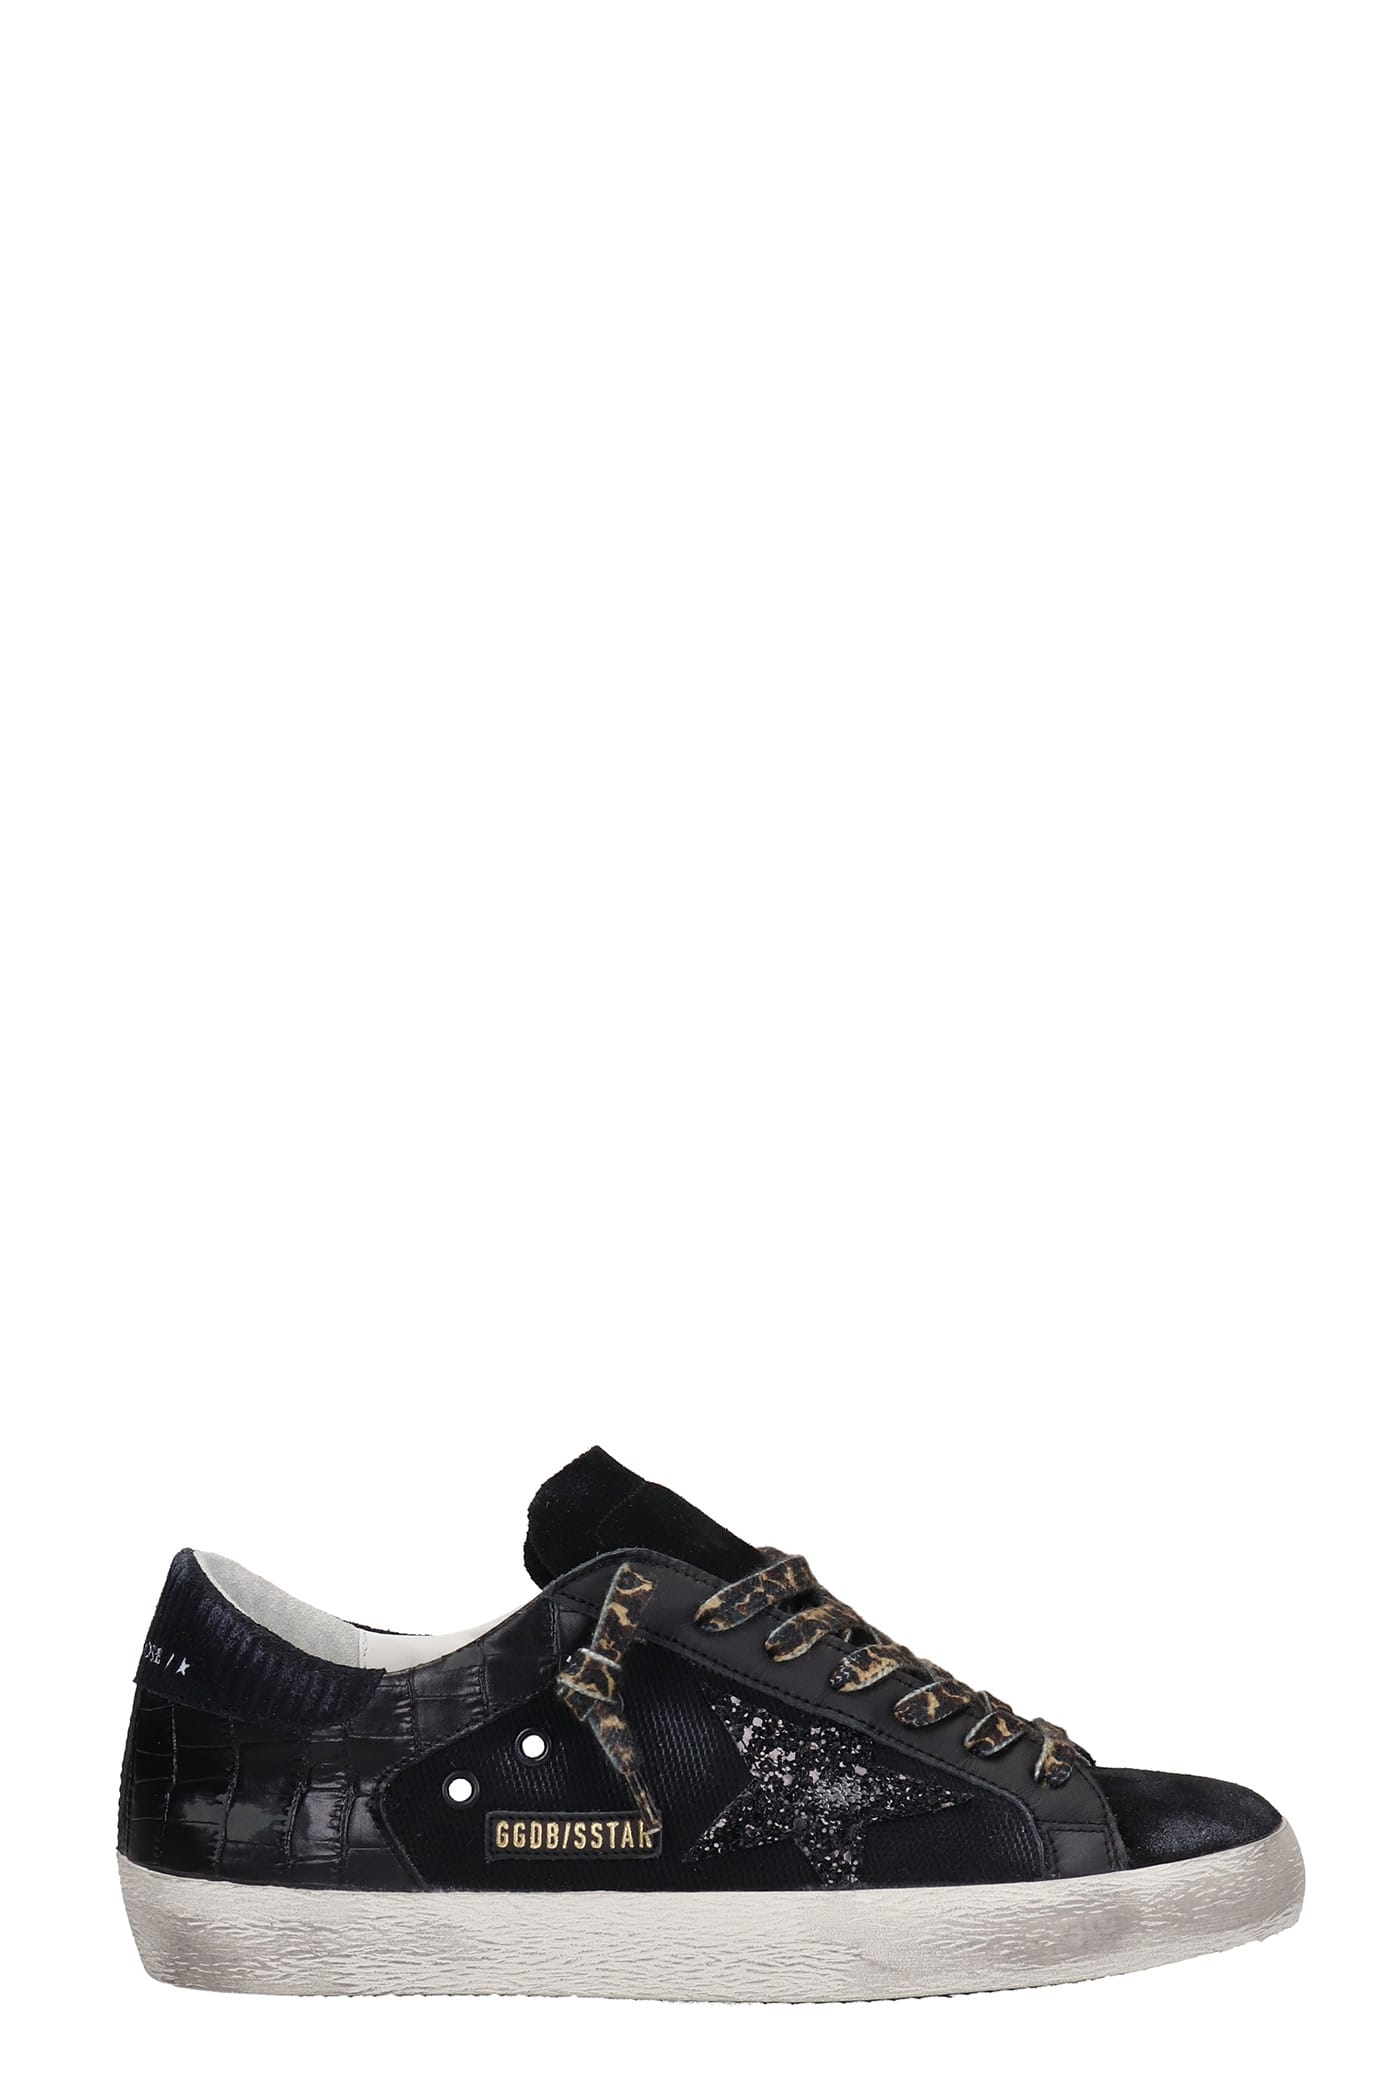 Golden Goose Superstar Sneakers In Black Leather And Fabric